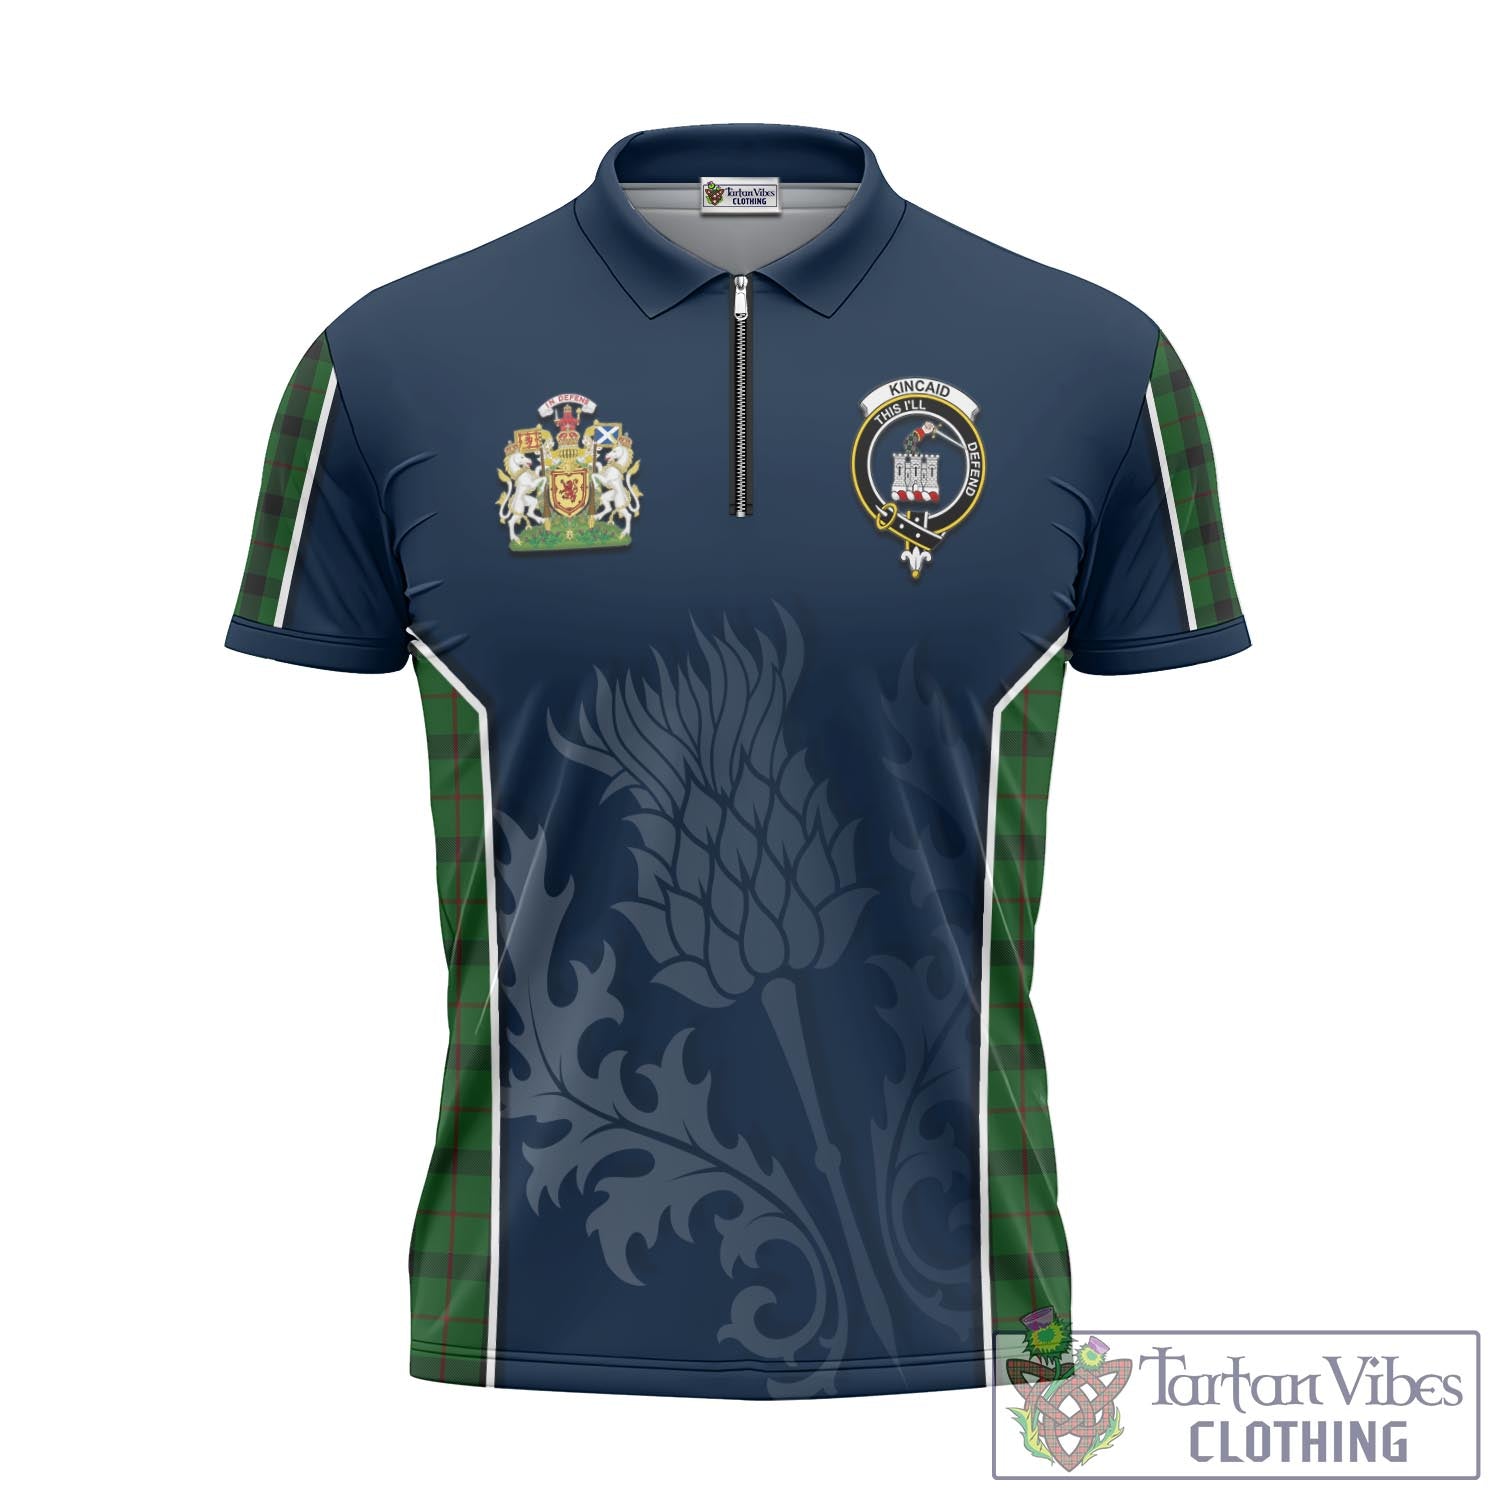 Tartan Vibes Clothing Kincaid Tartan Zipper Polo Shirt with Family Crest and Scottish Thistle Vibes Sport Style